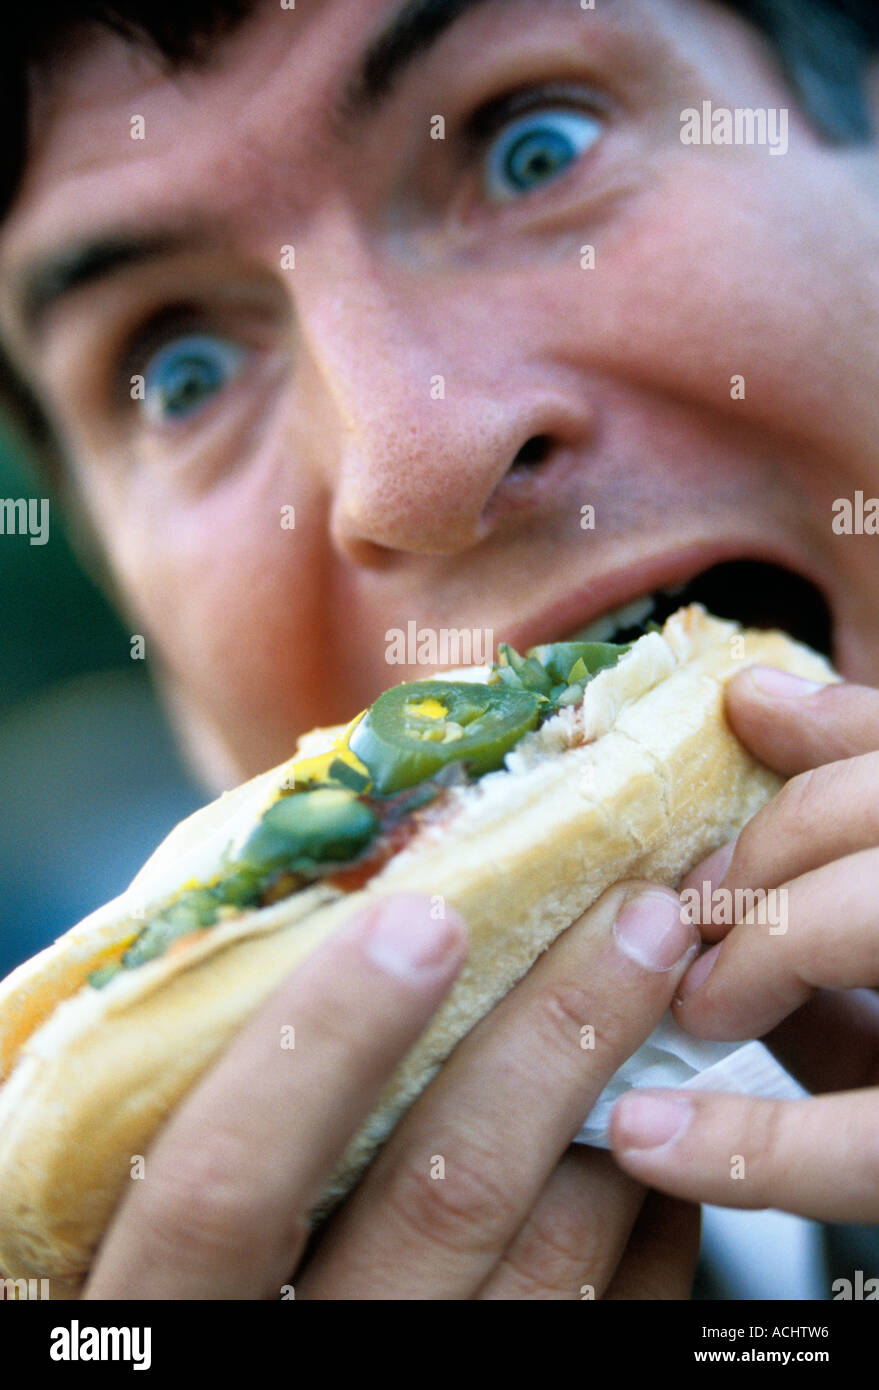 Caucasian man eating hot dog with hot peppers Stock Photo